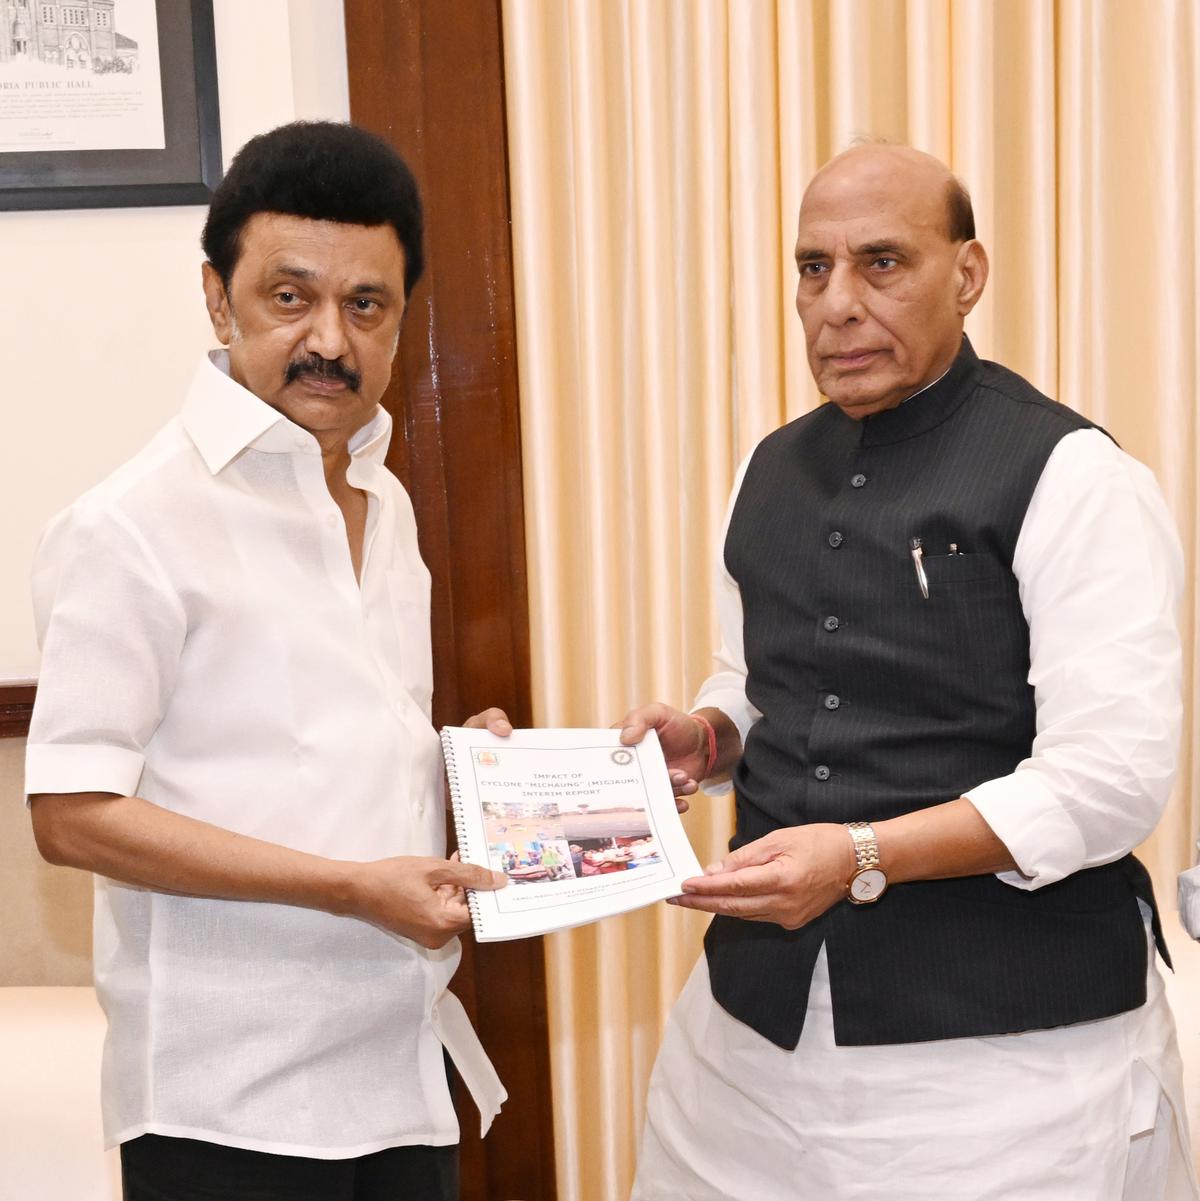 CM M.K. Stalin presented a letter detailing the demands of the State government to Defence Minister Rajnath Singh